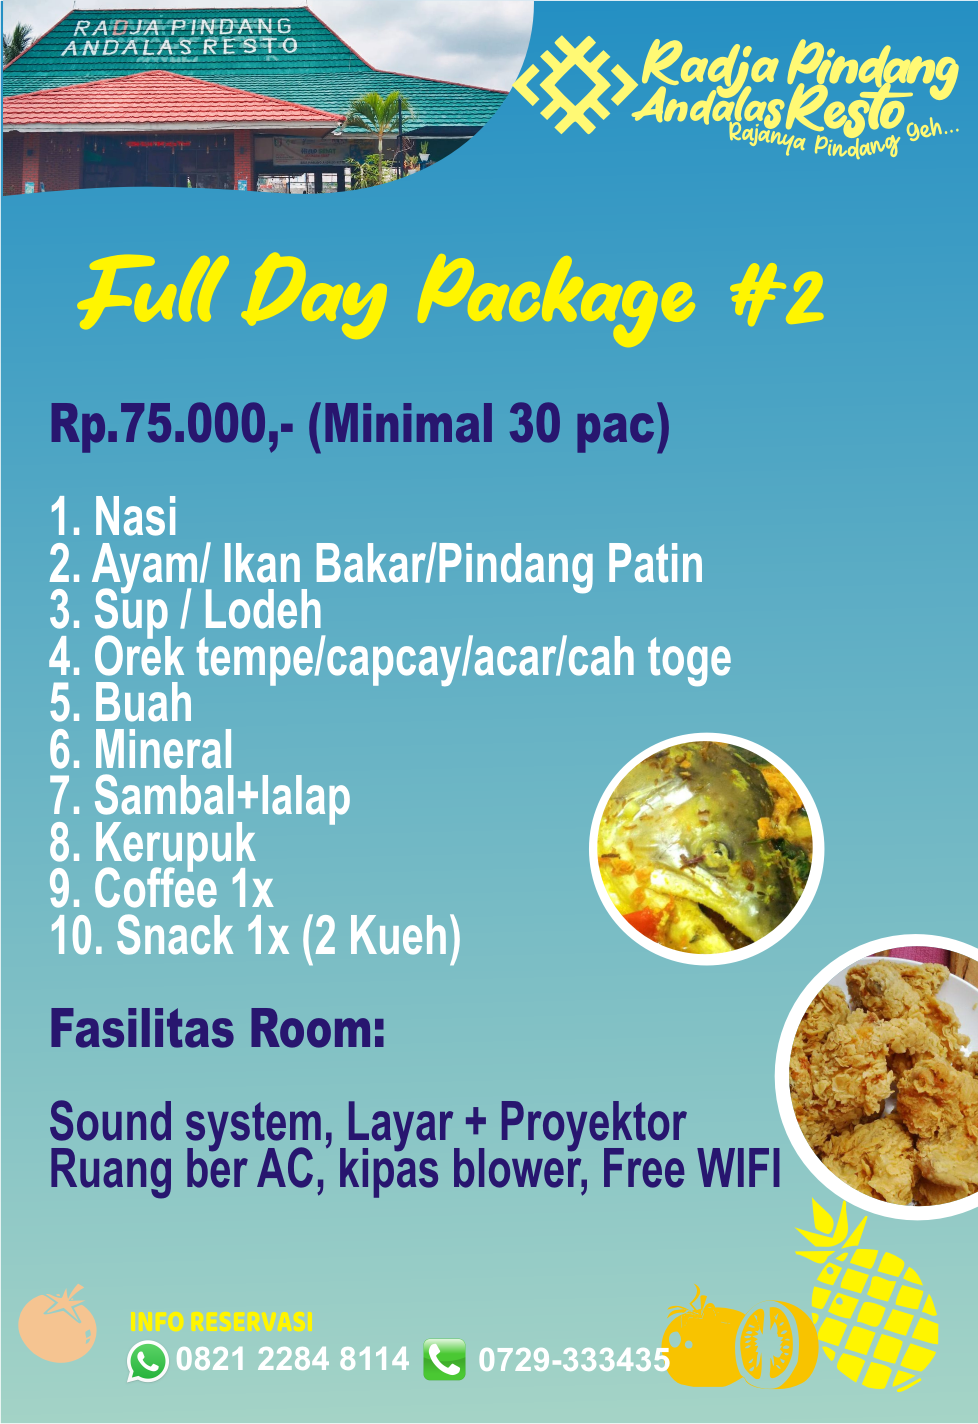 FULL DAY PACKAGE #2